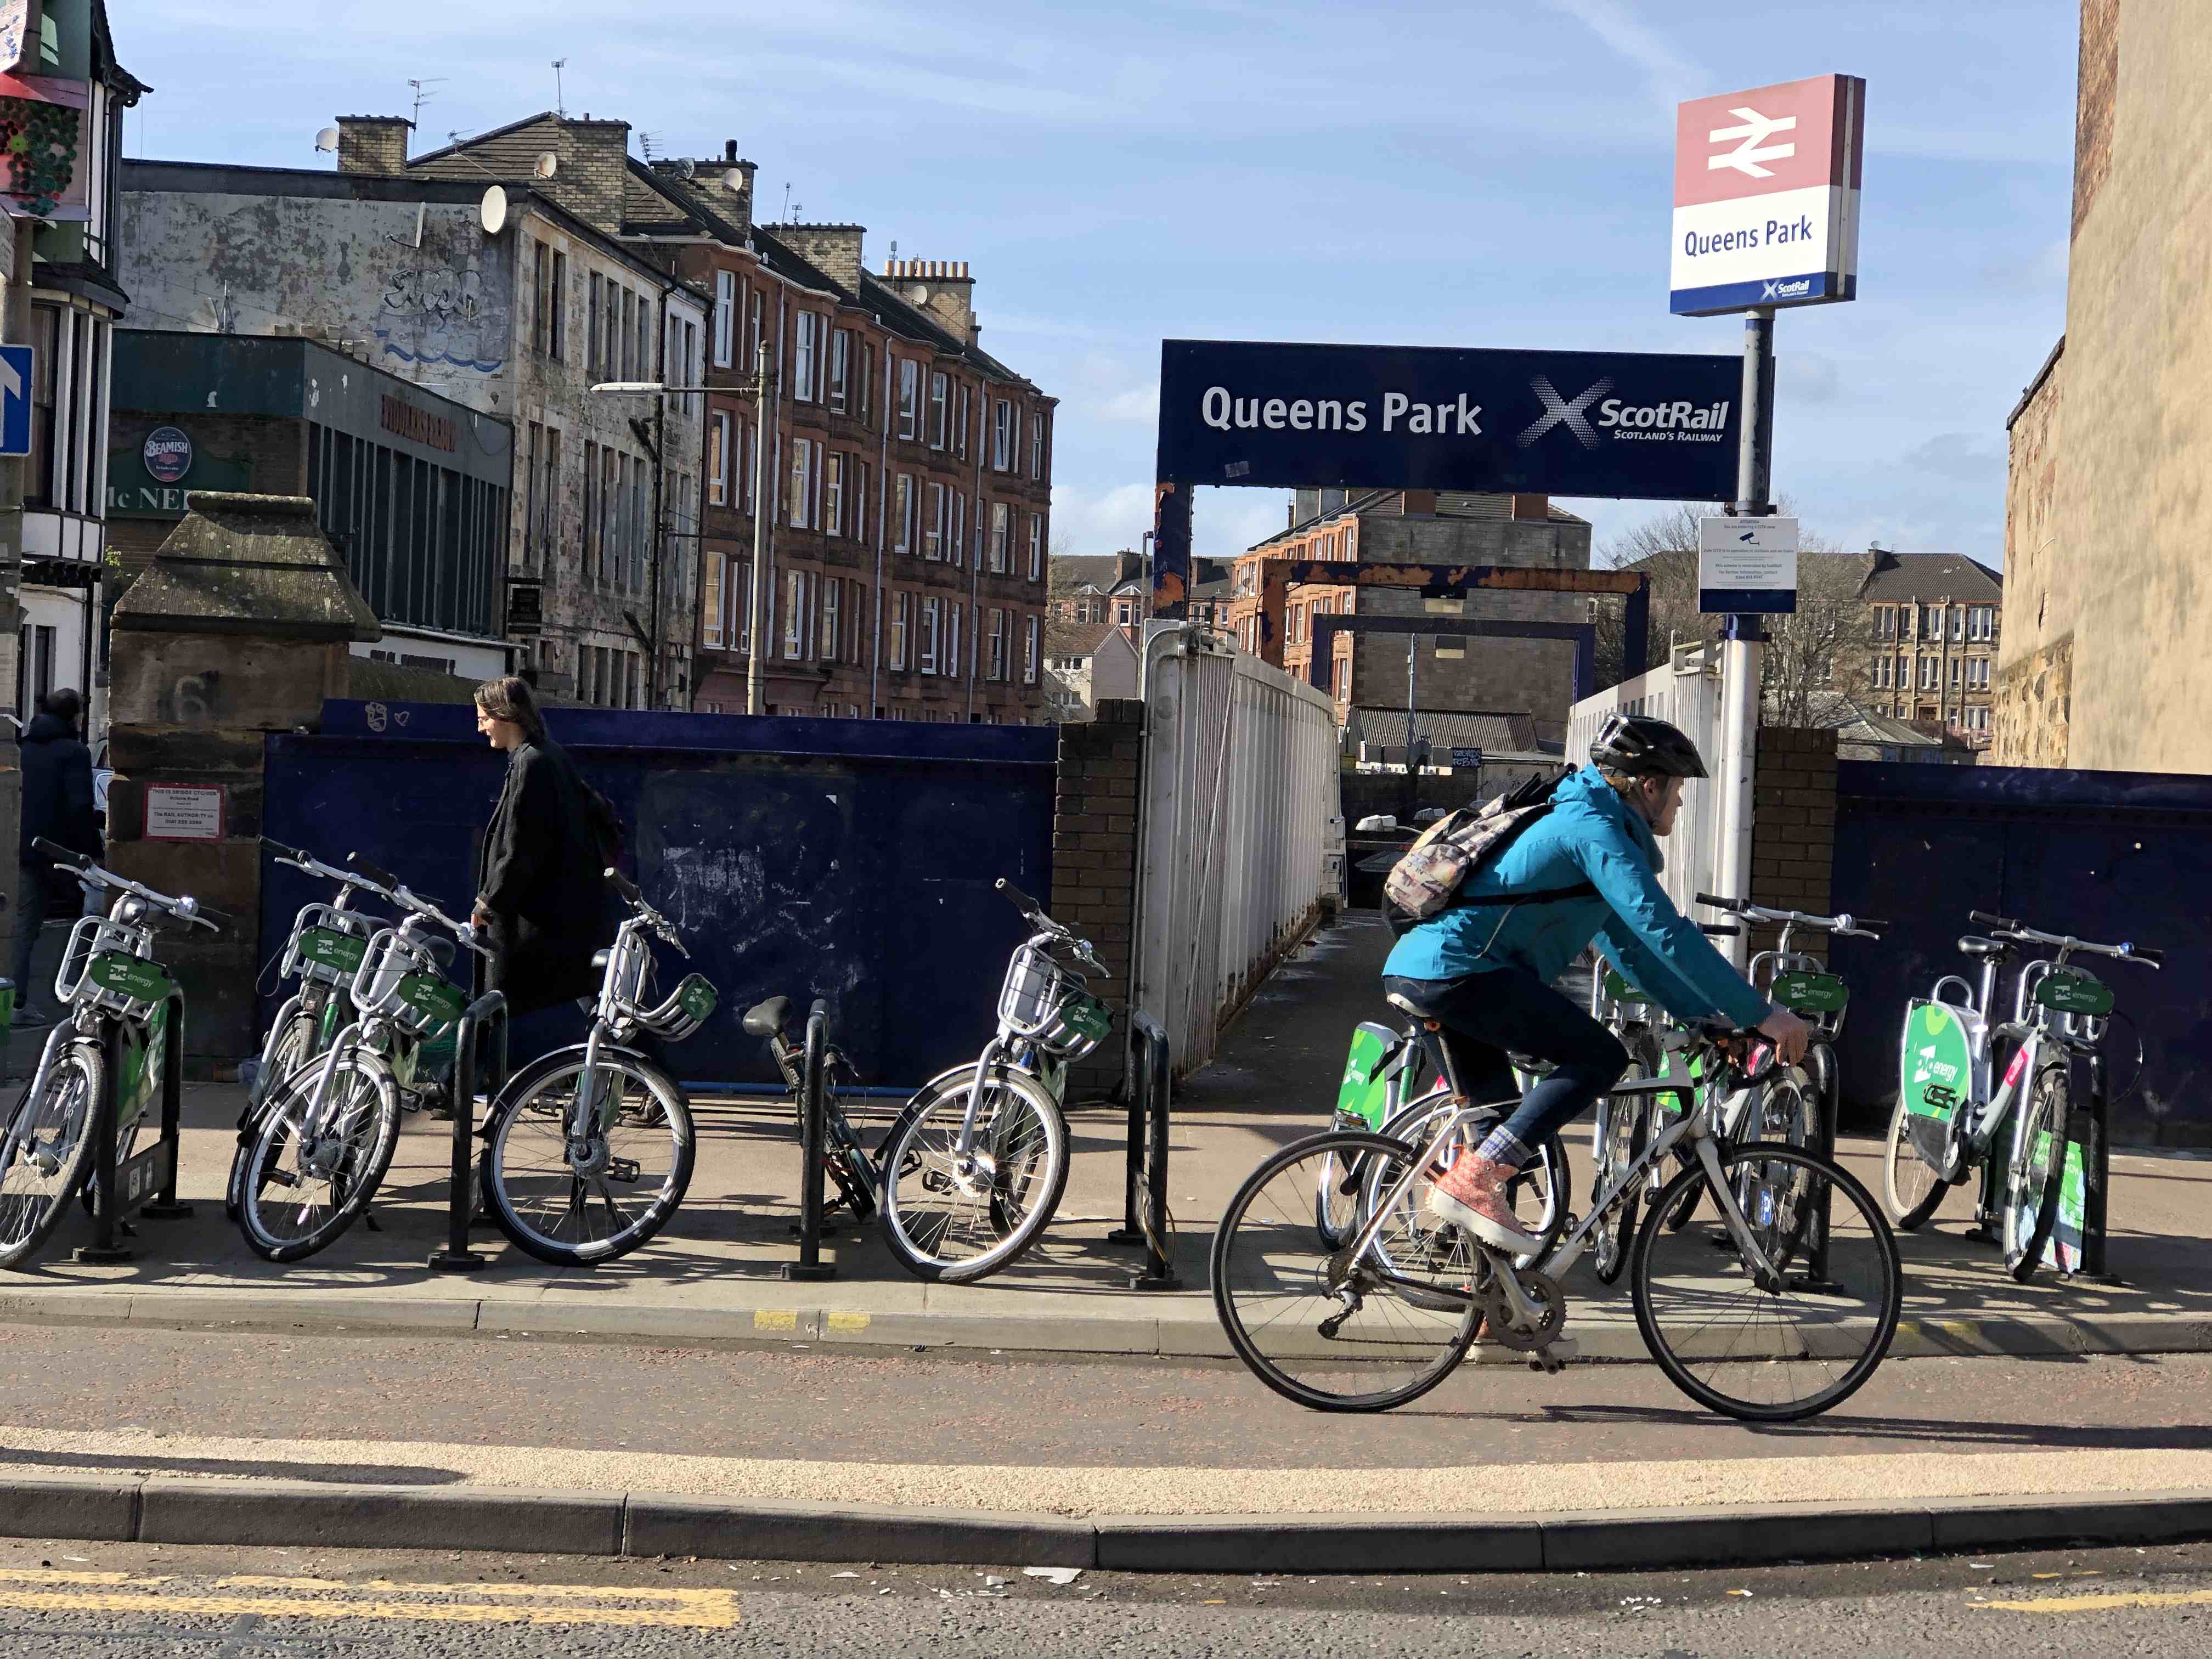 A cyclist is riding past the entrance to Queens Park train station in Glasgow. Someone is walking on the pavement in the opposite direction, and about seven bicycles are parked in a row.